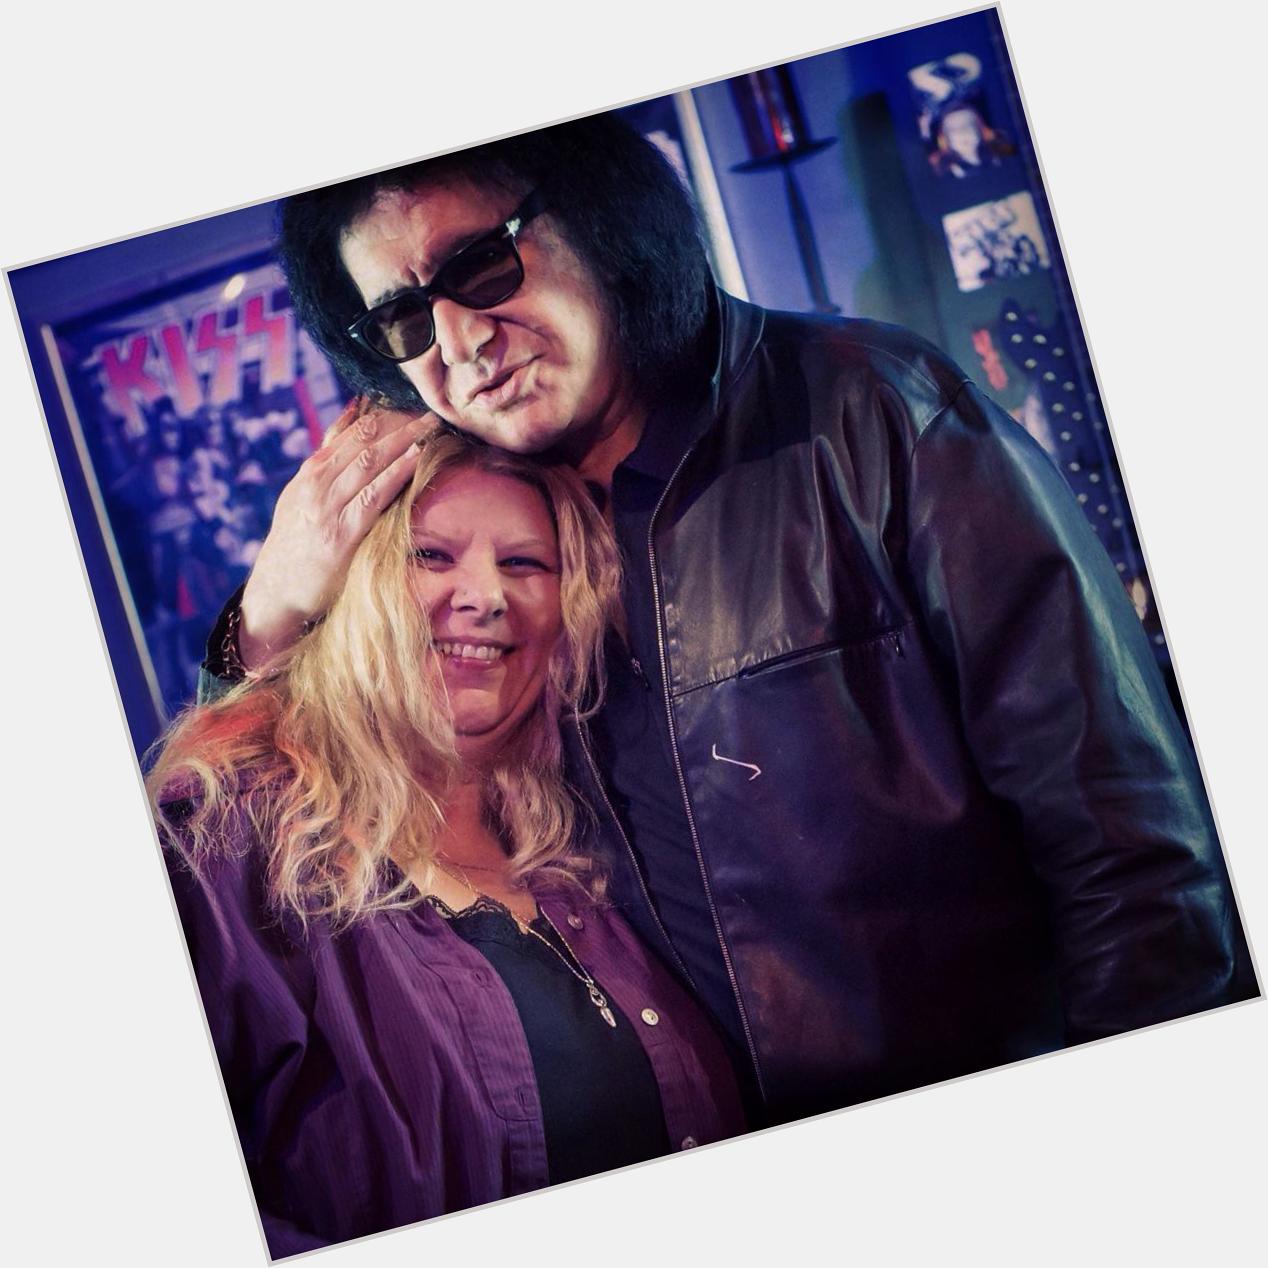 A VERY Happy Birthday to our Editor In Chief, Sylvia Lee!!! (pictured with Gene Simmons of KISS ) 